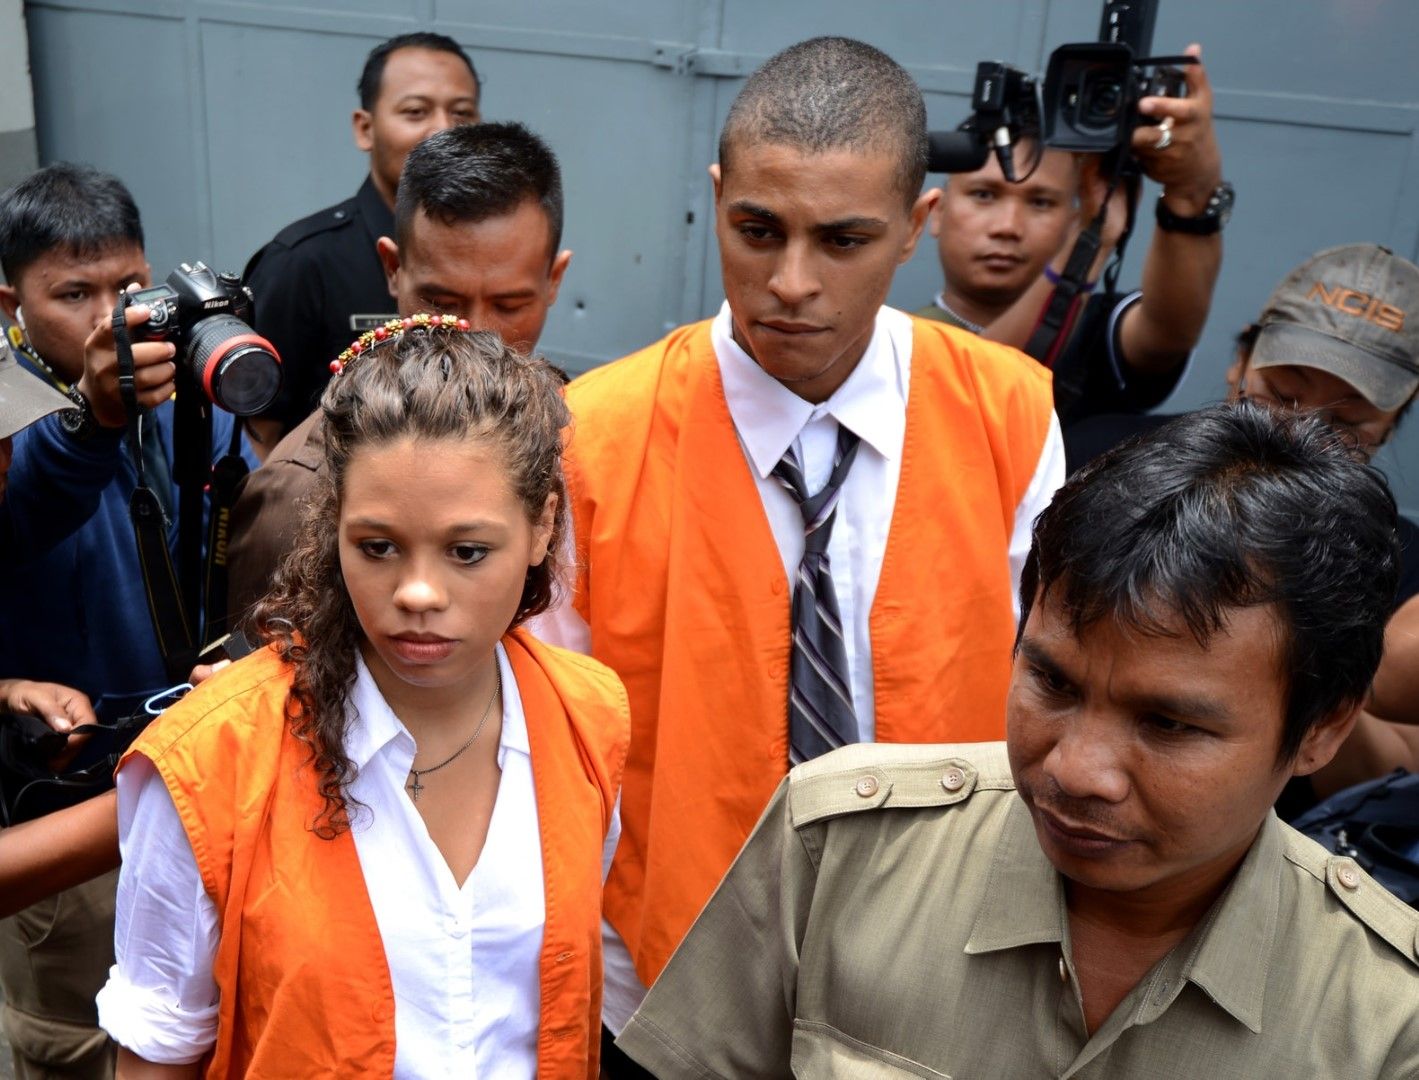 Chicago Woman In Bali Suitcase Murder To Be Released Oct 29